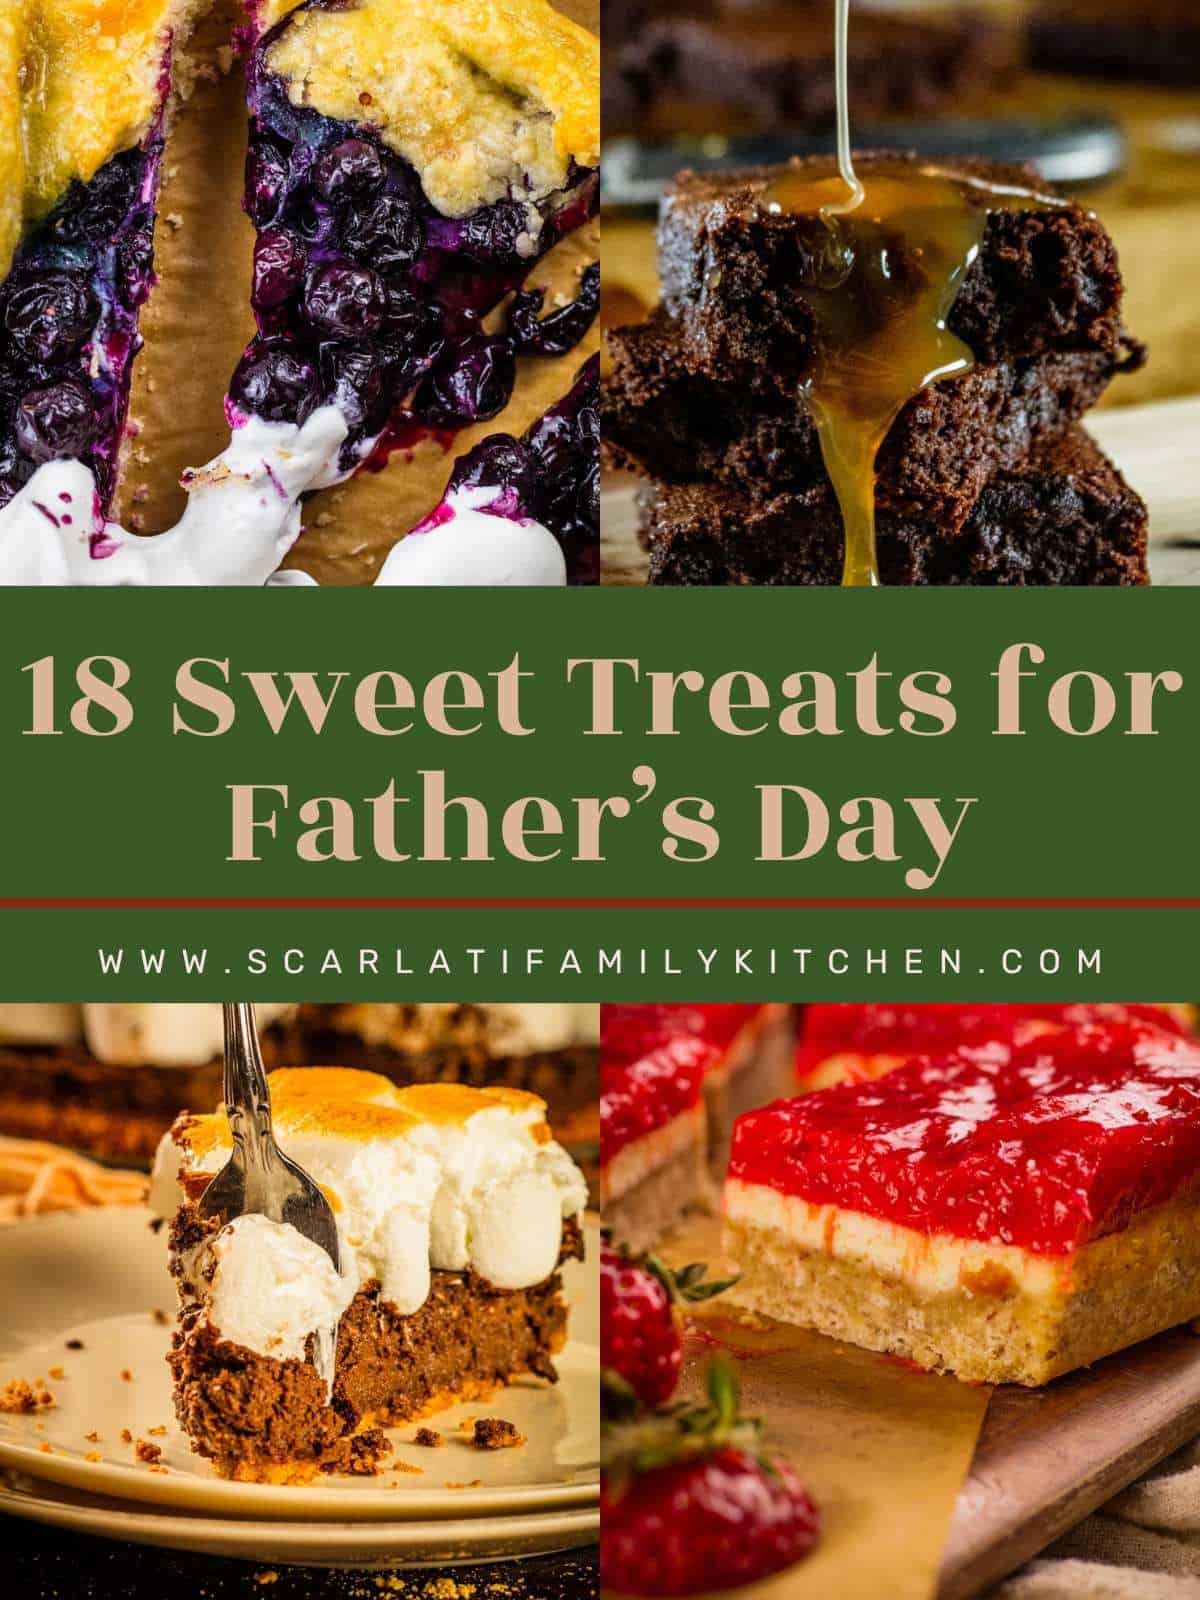 collage of dessert recipes with text overlay "18 sweet treats for father's day".